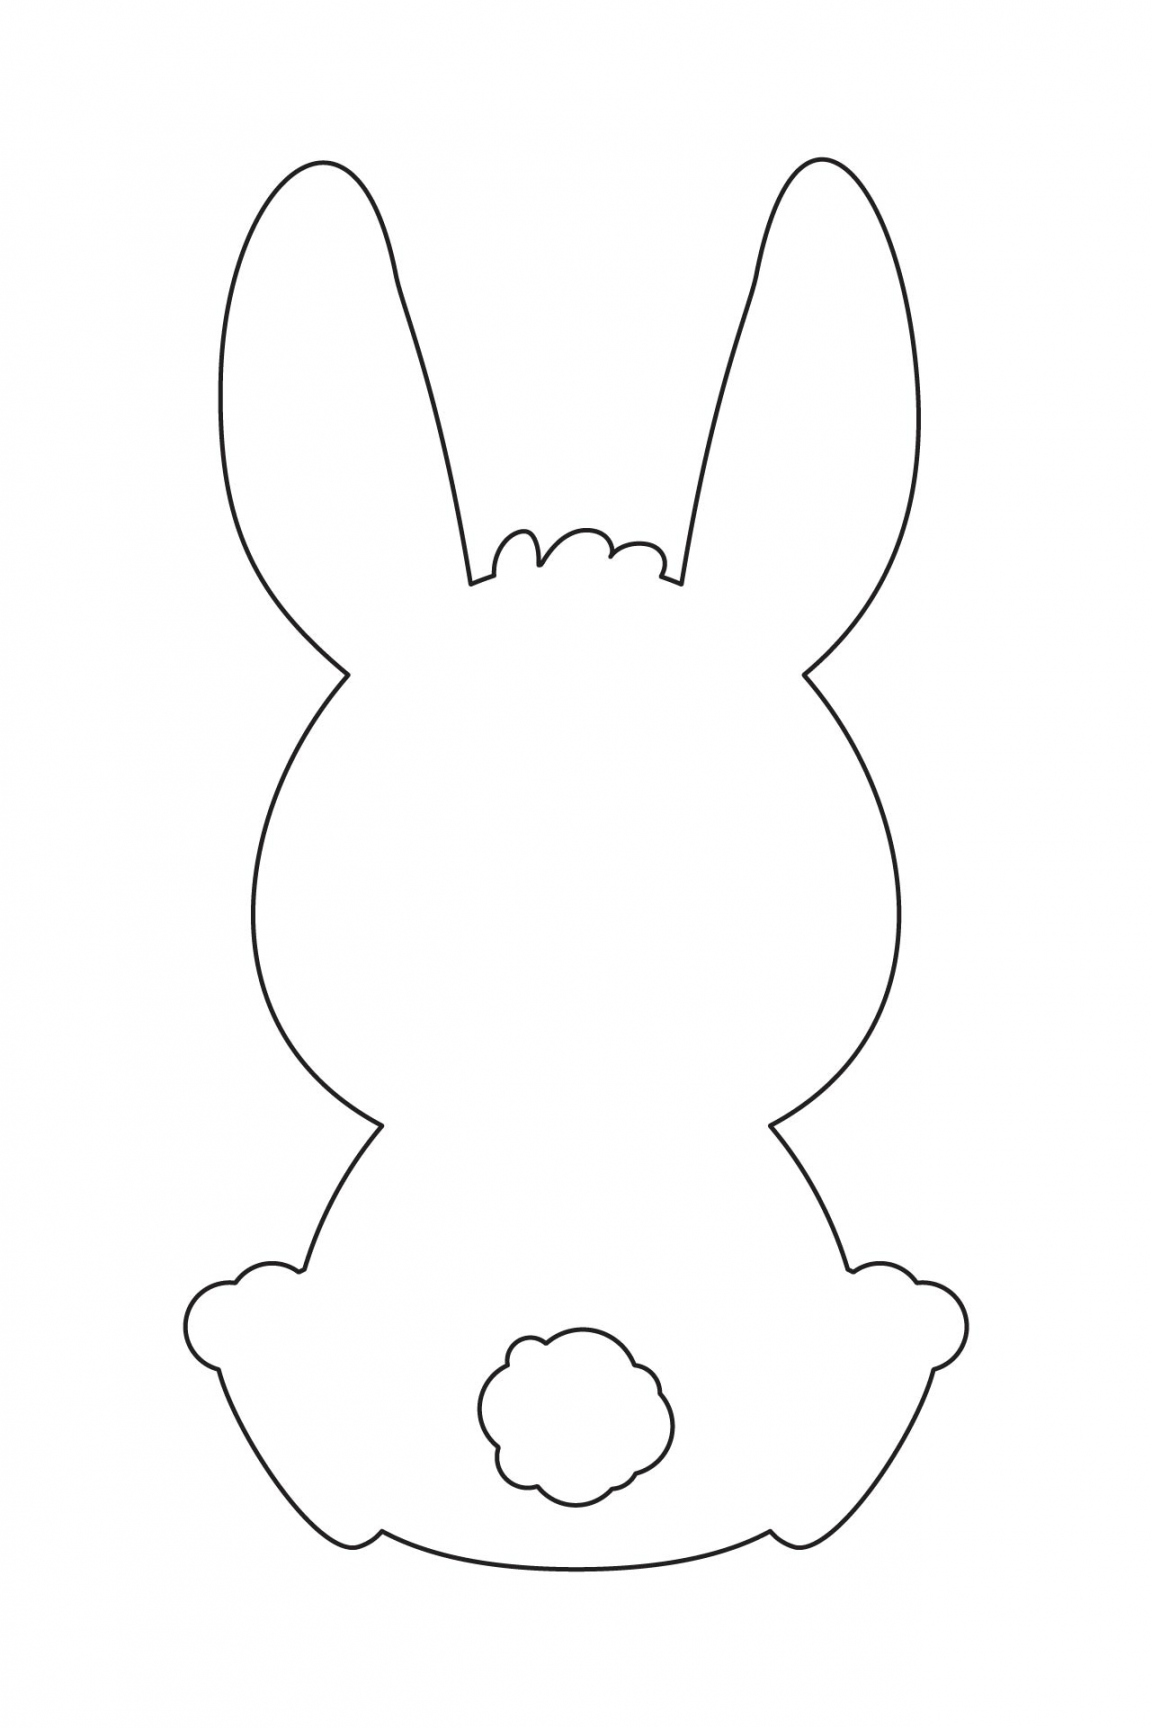 Best Free Printable Easter Bunny Stencil - printablee - Printable Easter Bunny Template